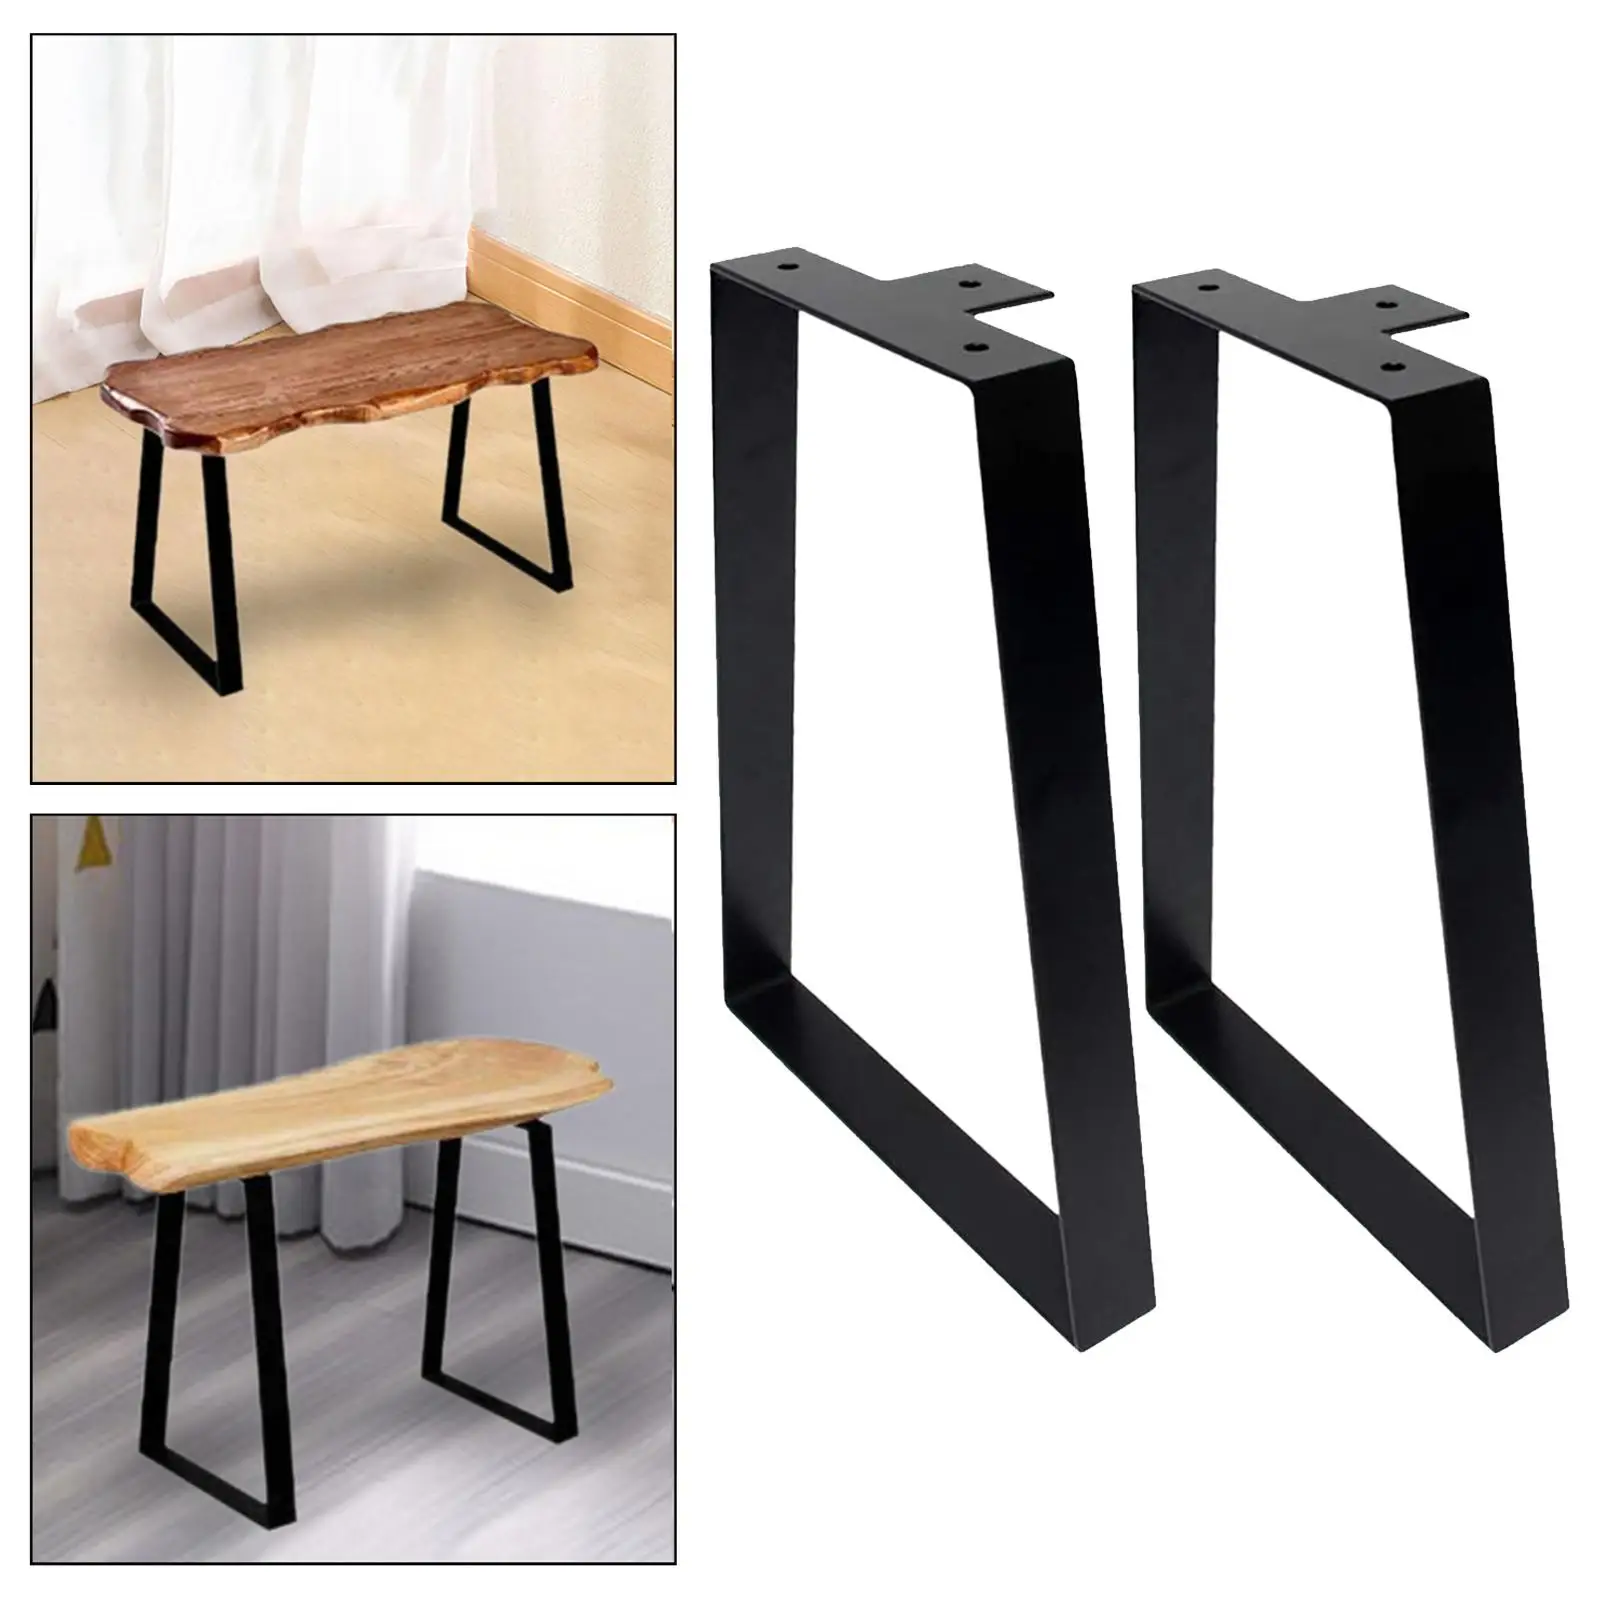 2x Metal Table Legs Furniture Legs Iron Desk Legs Heavy Duty DIY Industrial Replacement Bench Legs for Night Stands Dining Table